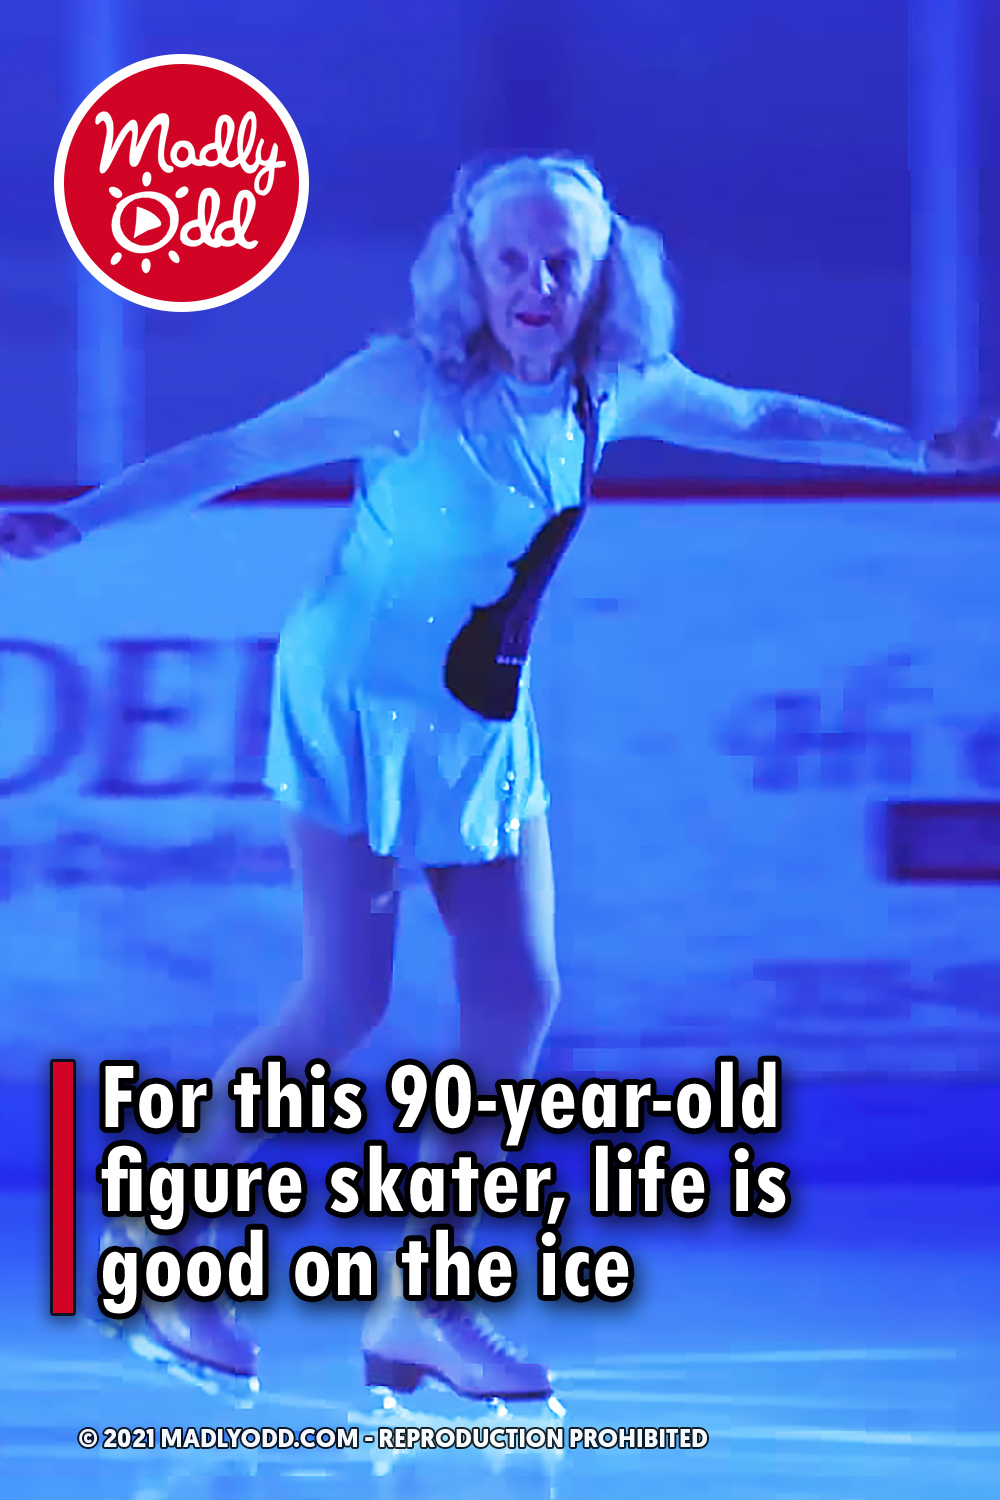 For this 90-year-old figure skater, life is good on the ice